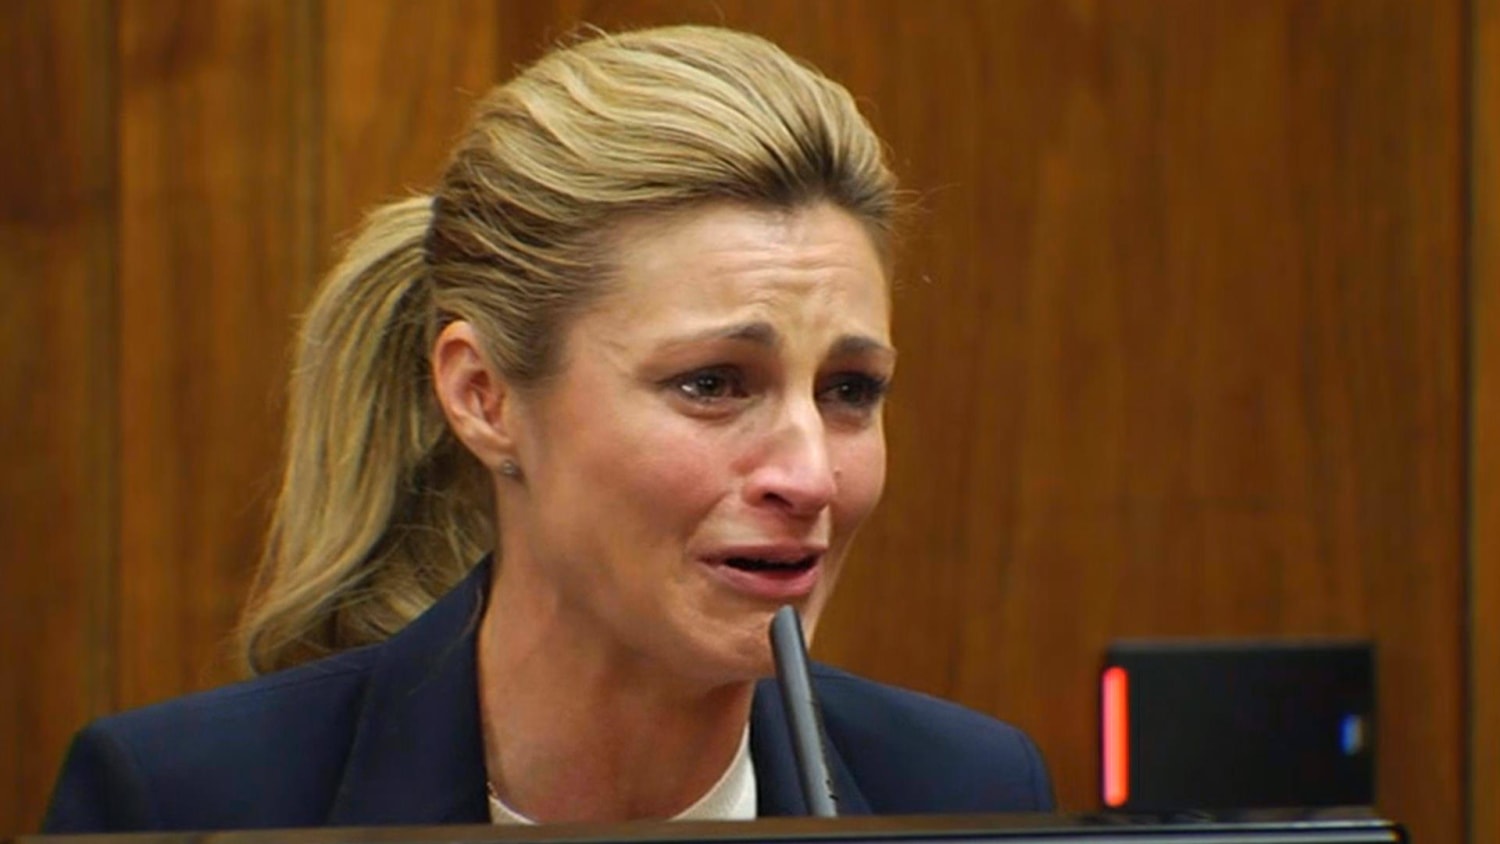 alan zamarripa recommends Erin Andrews Naked Pictures